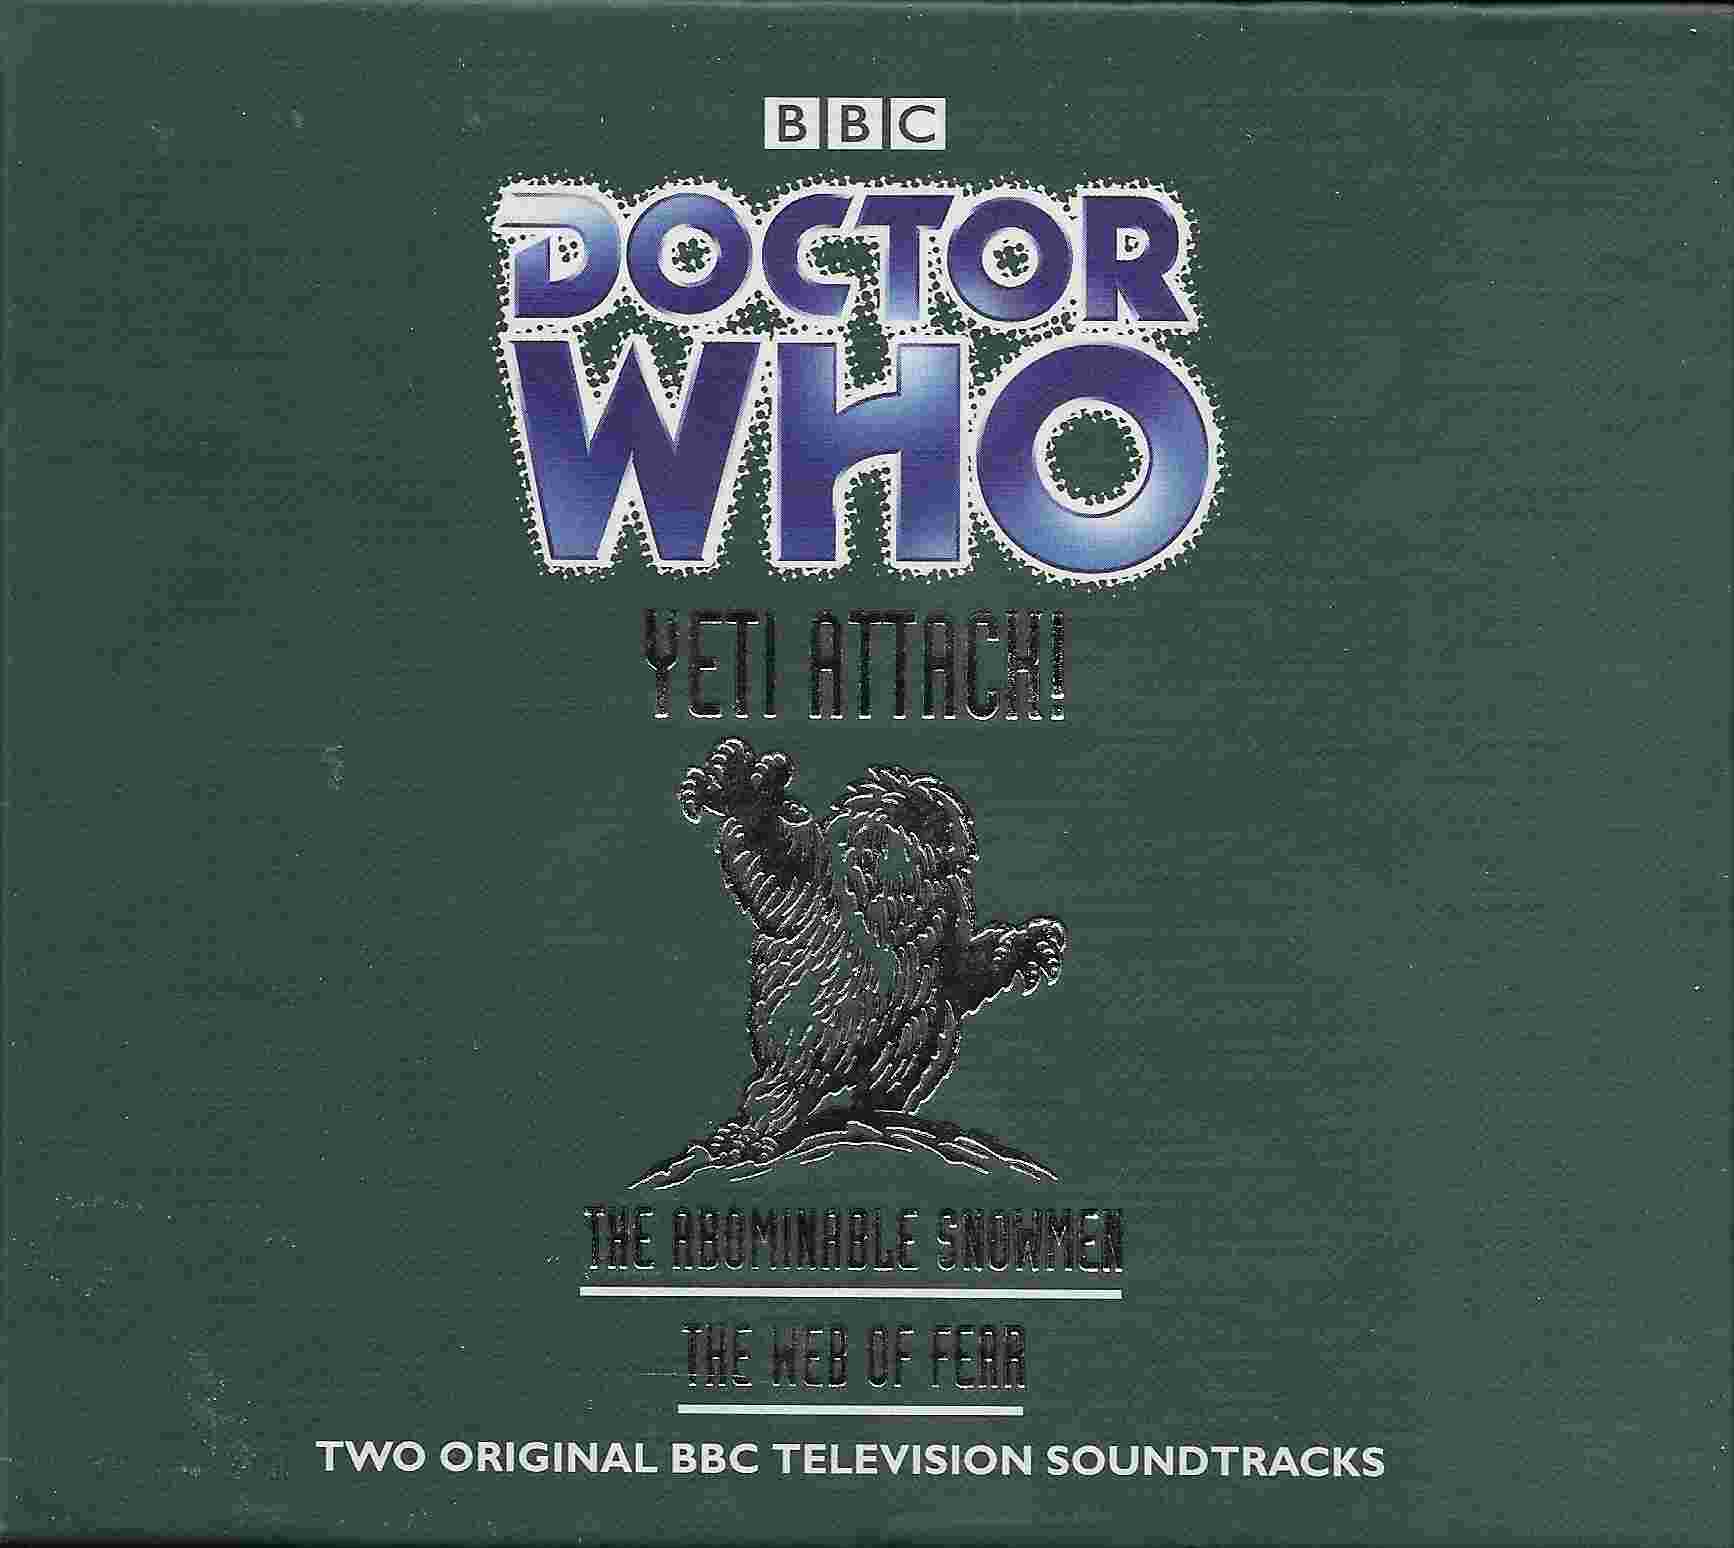 Picture of ISBN 0-563-49535-9 Doctor Who - Yeti attack! by artist Mervyn Haisman \& Henry Lincoln from the BBC records and Tapes library